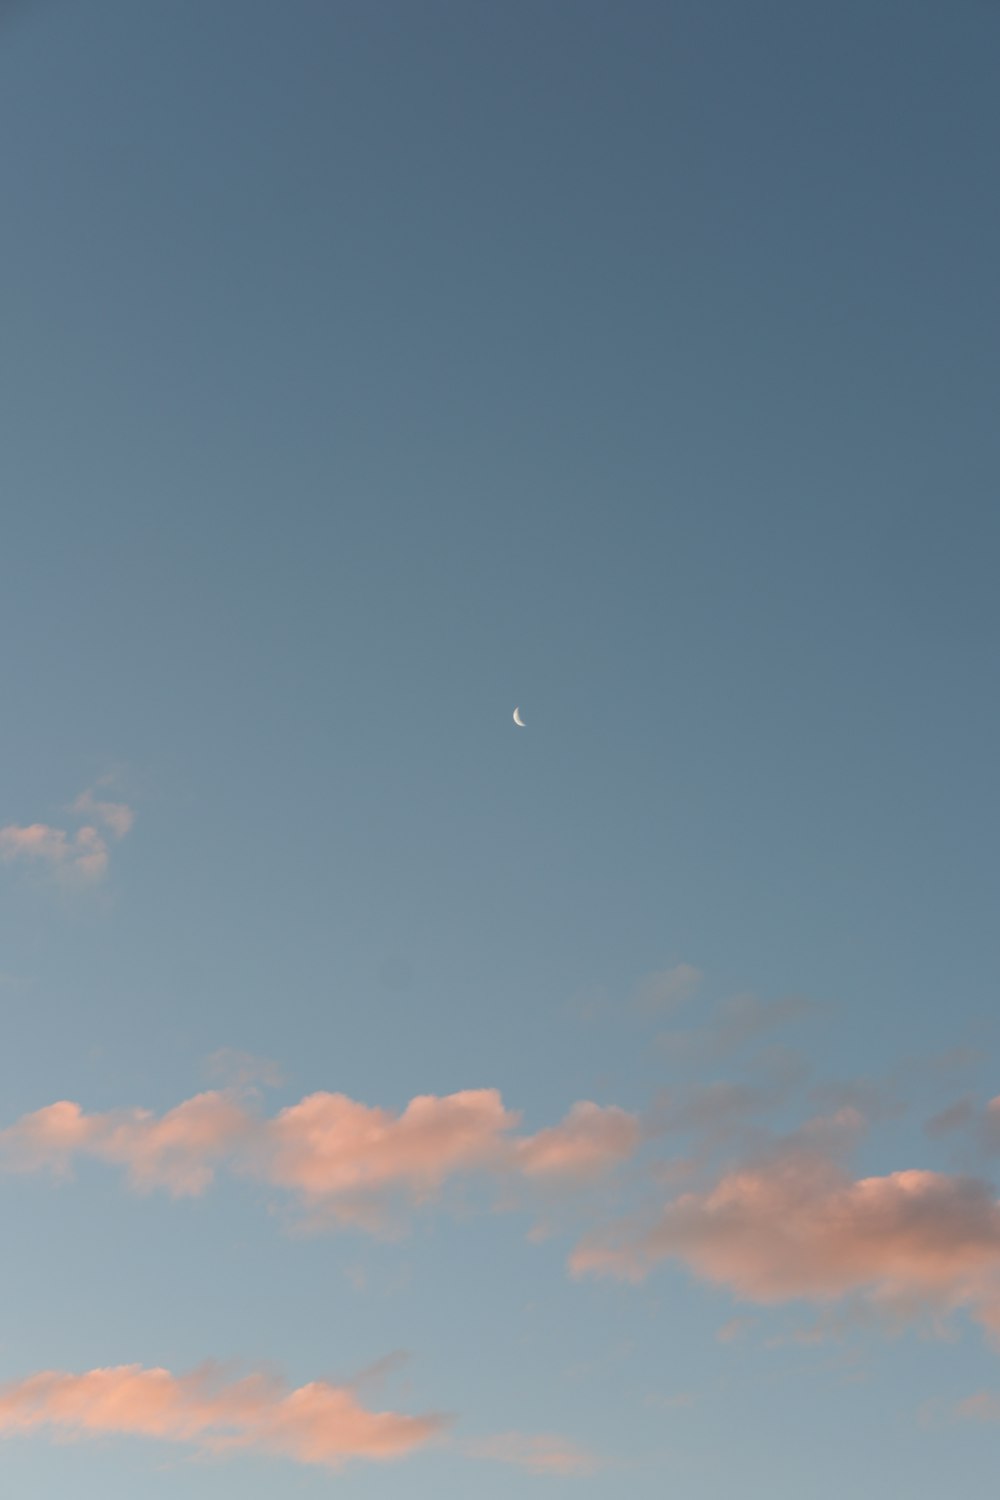 a plane flying in the sky with the moon in the distance